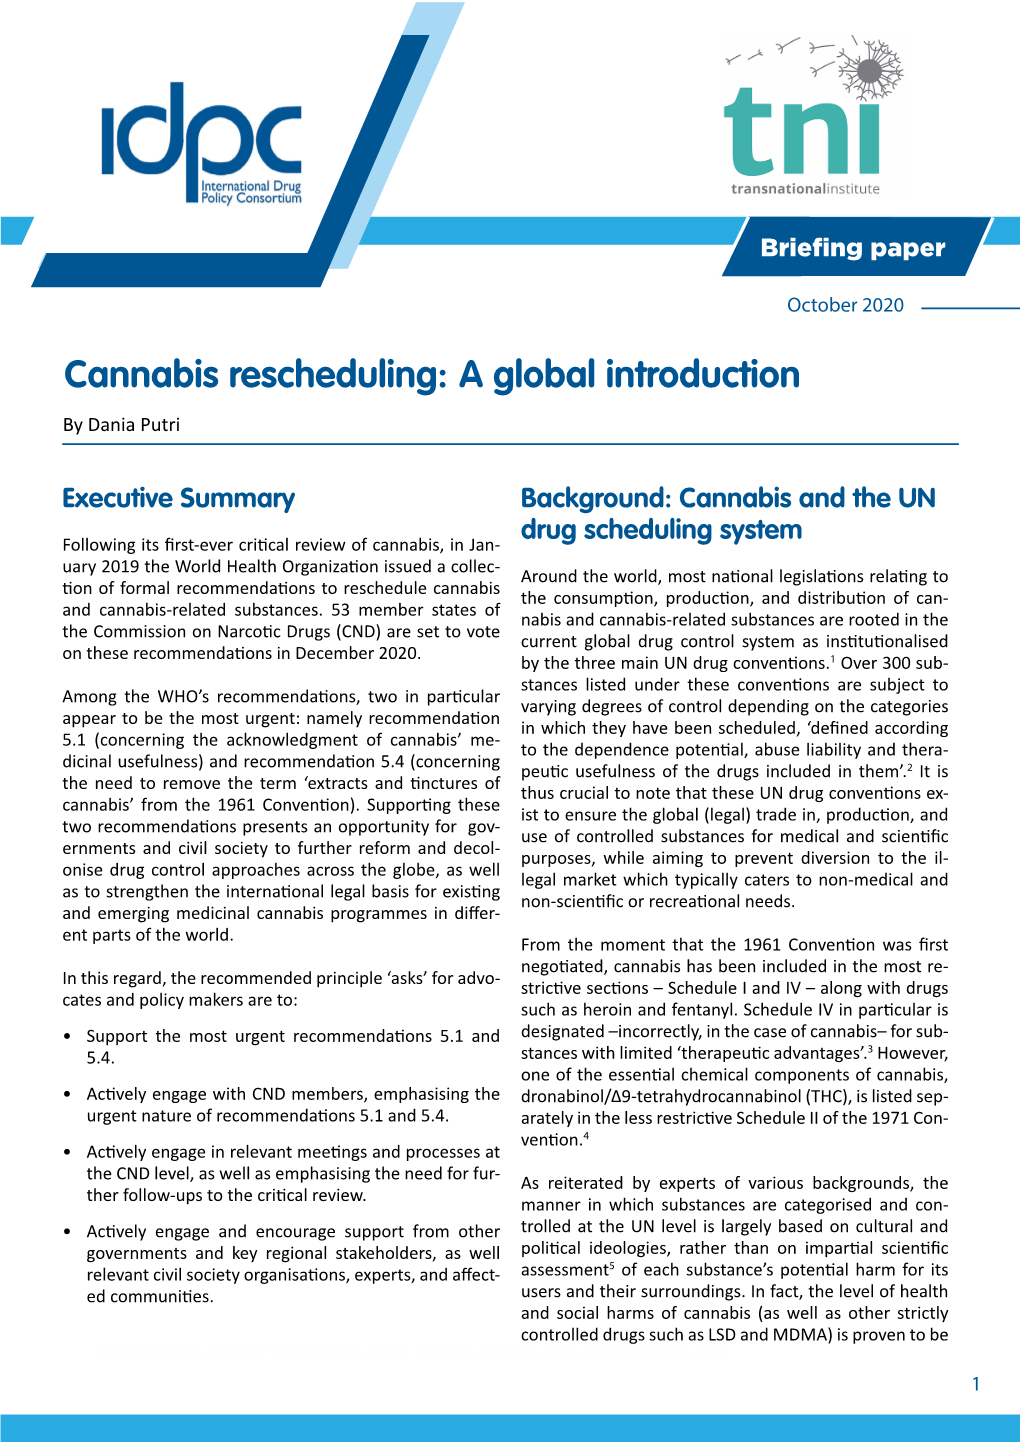 Cannabis Rescheduling: a Global Introduction by Dania Putri